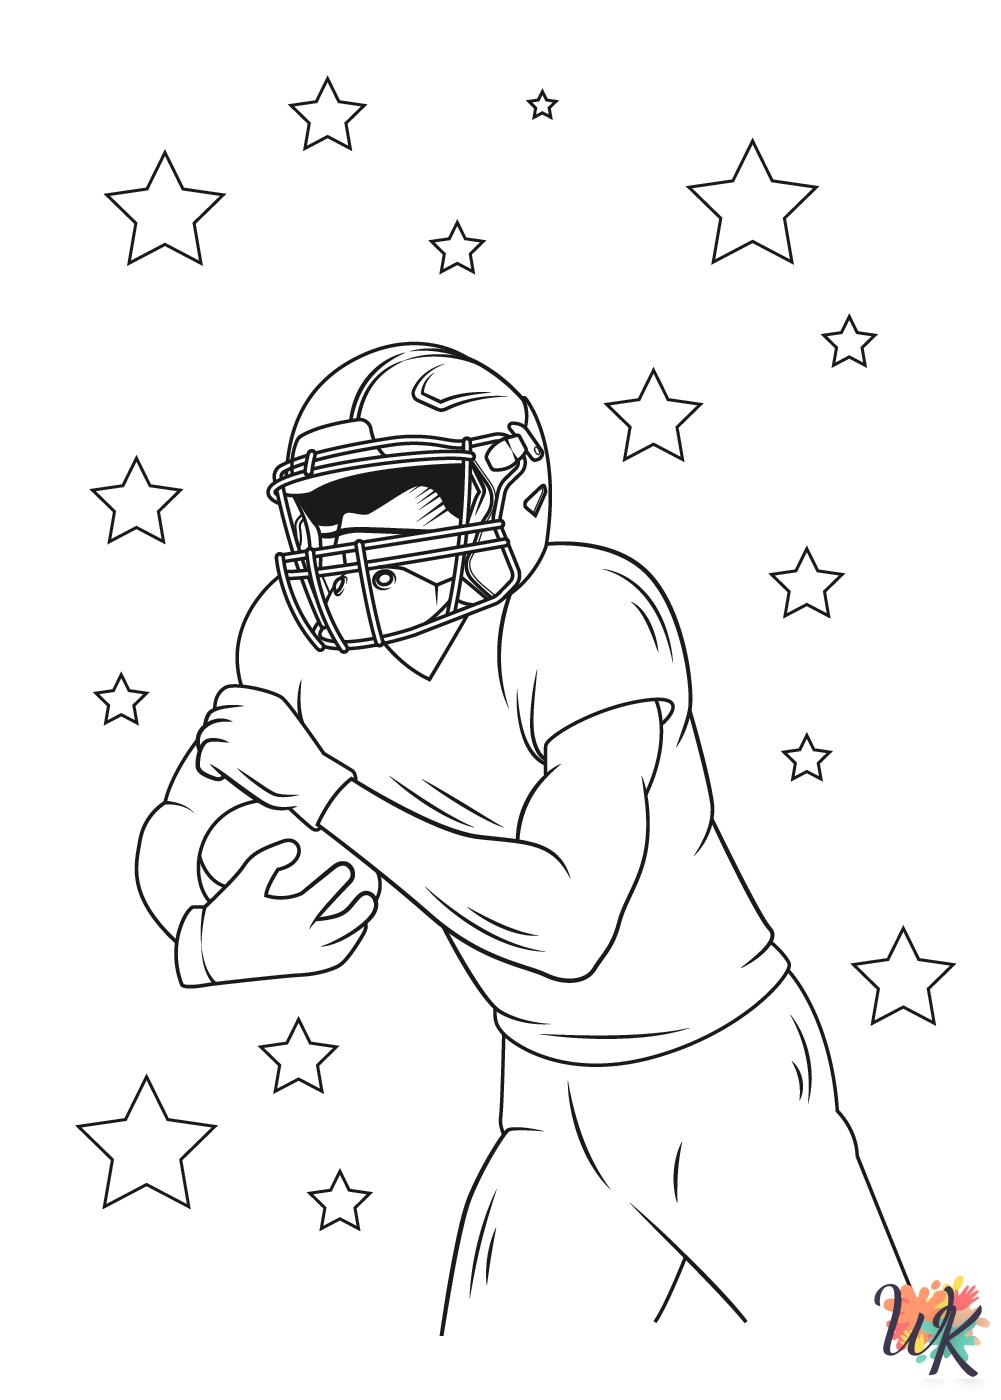 NFL Coloring Pages 1